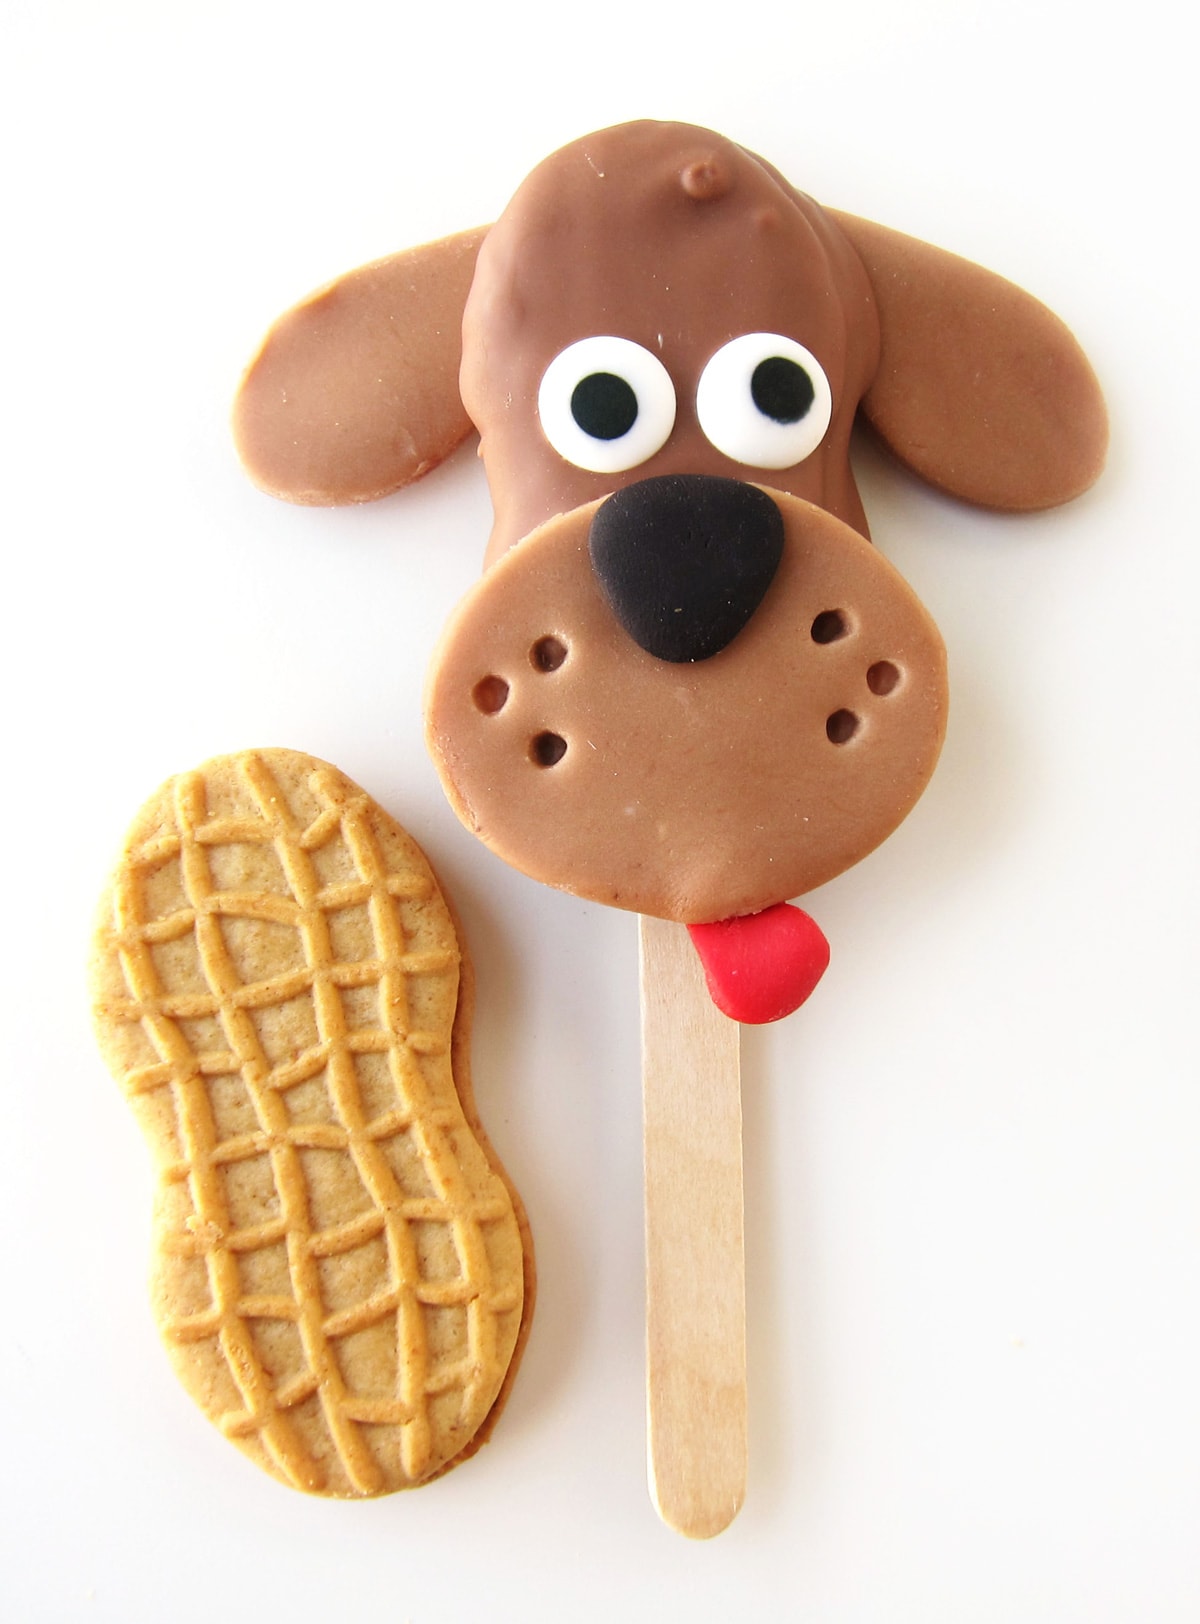 a Nutter Butter Cookie next to a chocolate dog lollipop decorated with candy eyes and a modeling chocolate snout, nose, and tongue.